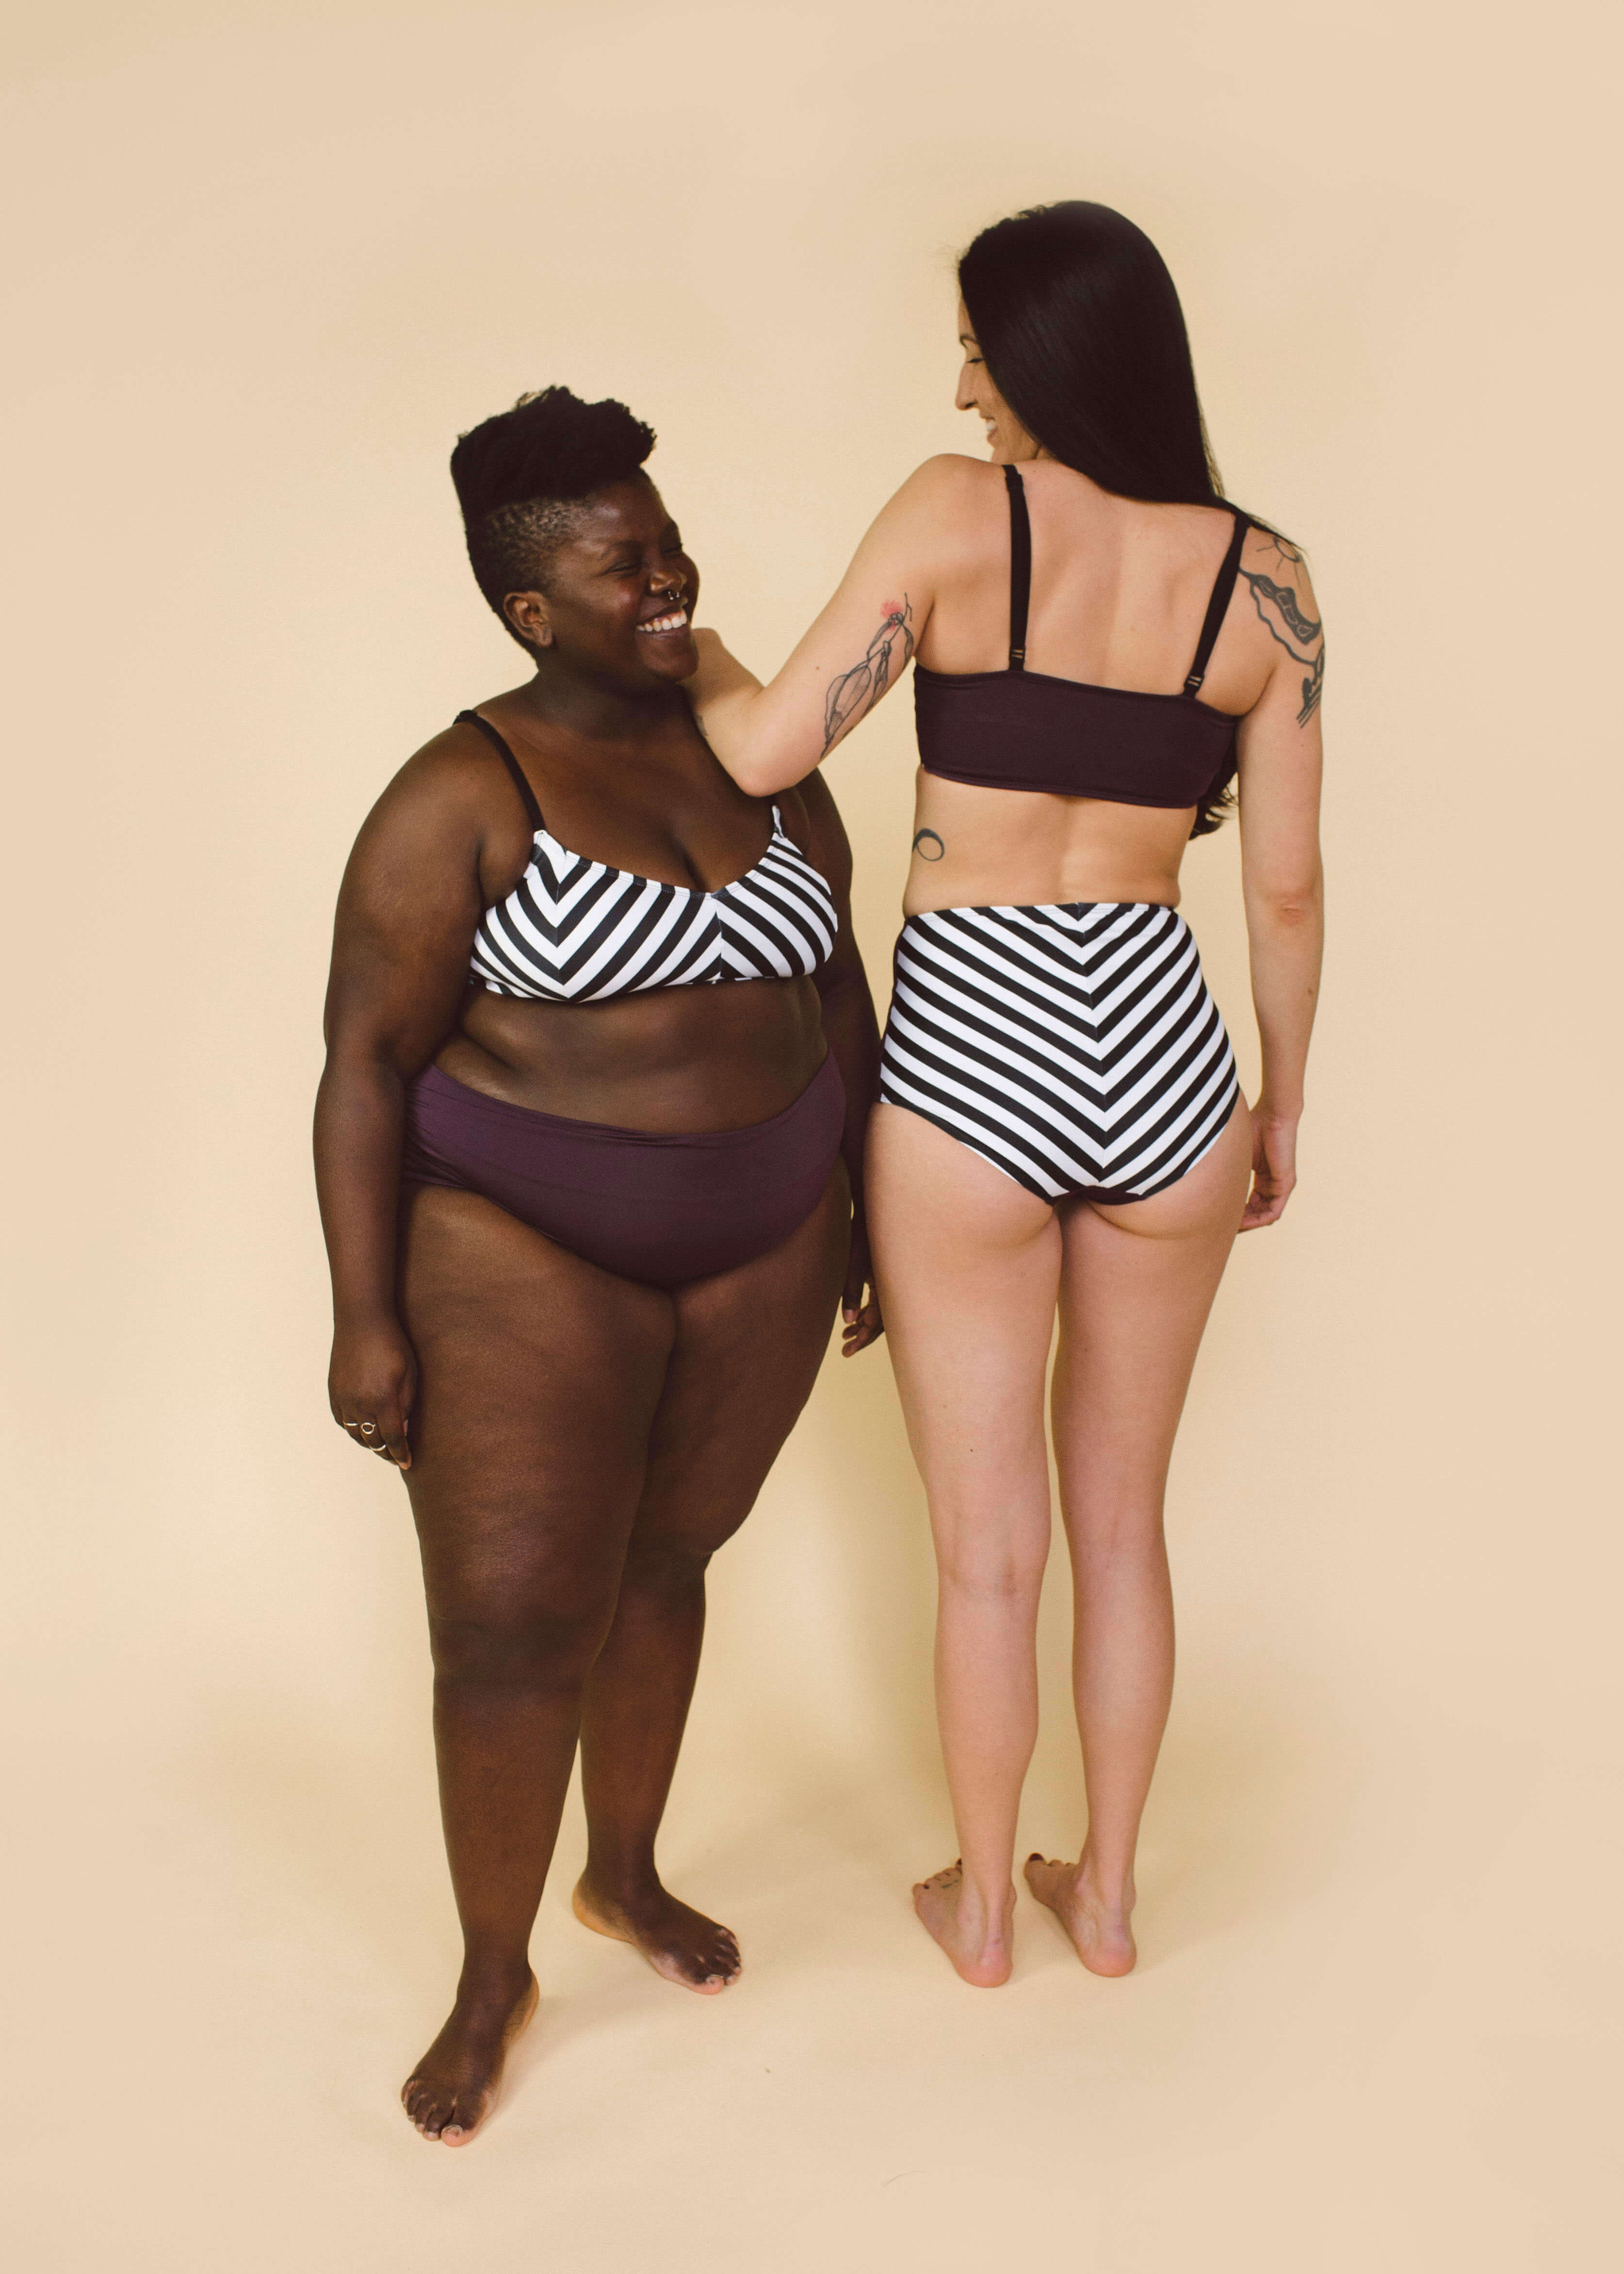 How To Care For Your Swimwear – Nettle's Tale